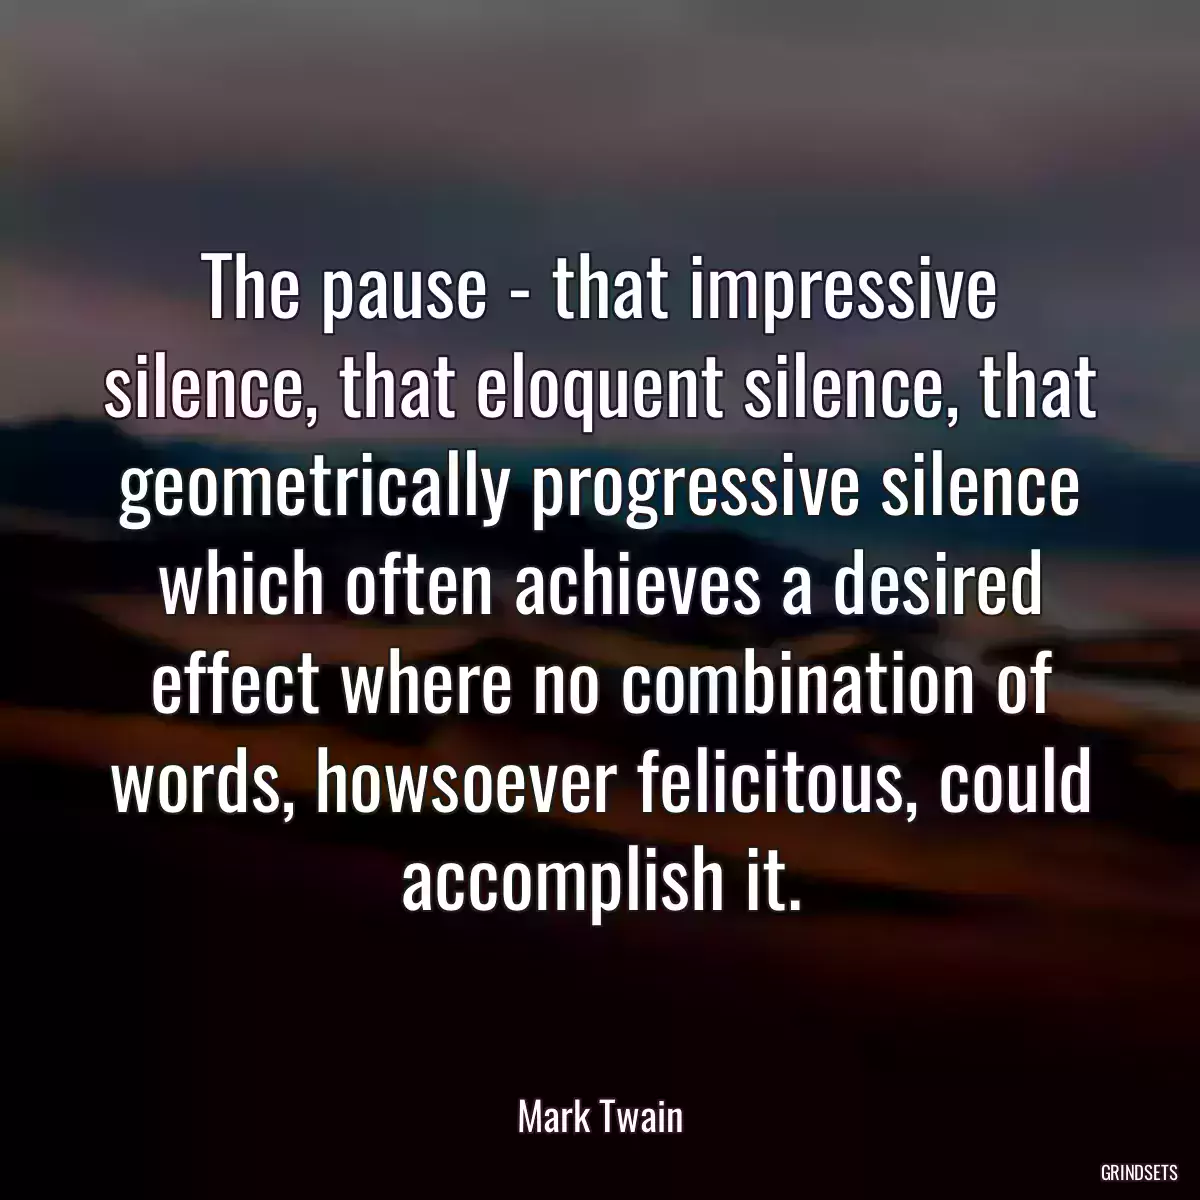 The pause - that impressive silence, that eloquent silence, that geometrically progressive silence which often achieves a desired effect where no combination of words, howsoever felicitous, could accomplish it.